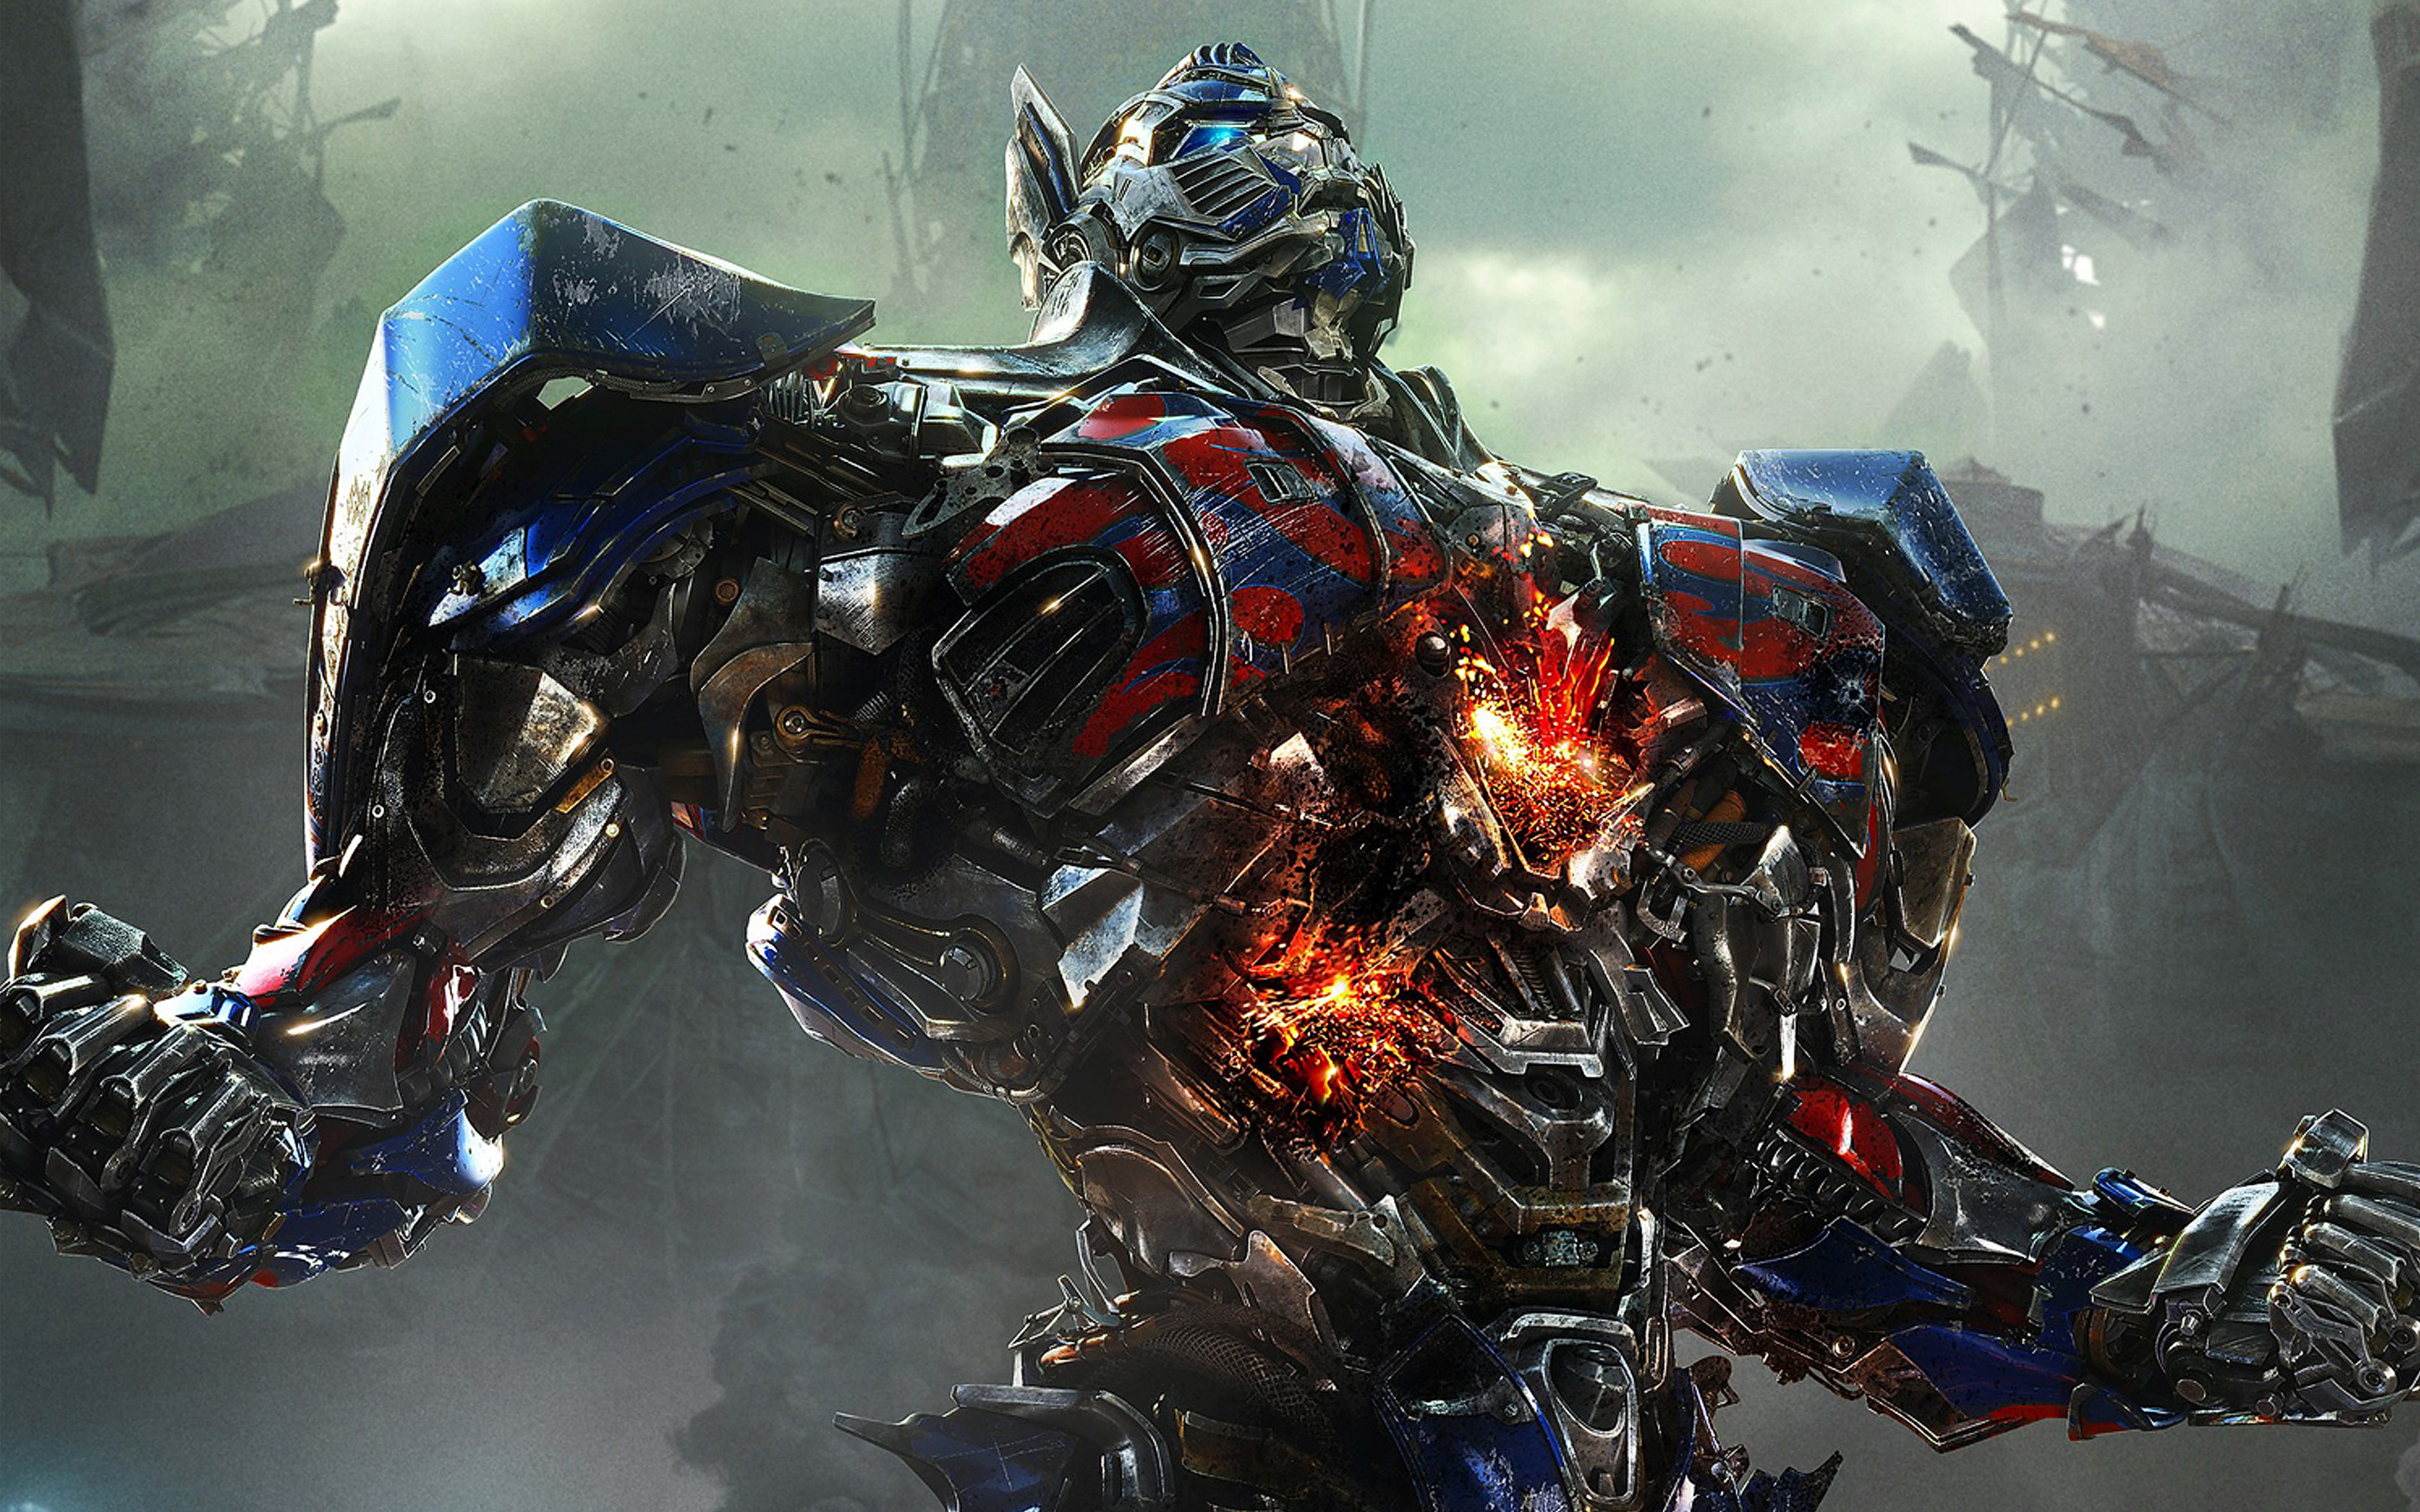 Geek insider, geekinsider, geekinsider. Com,, transformers: age of extinction-review, entertainment